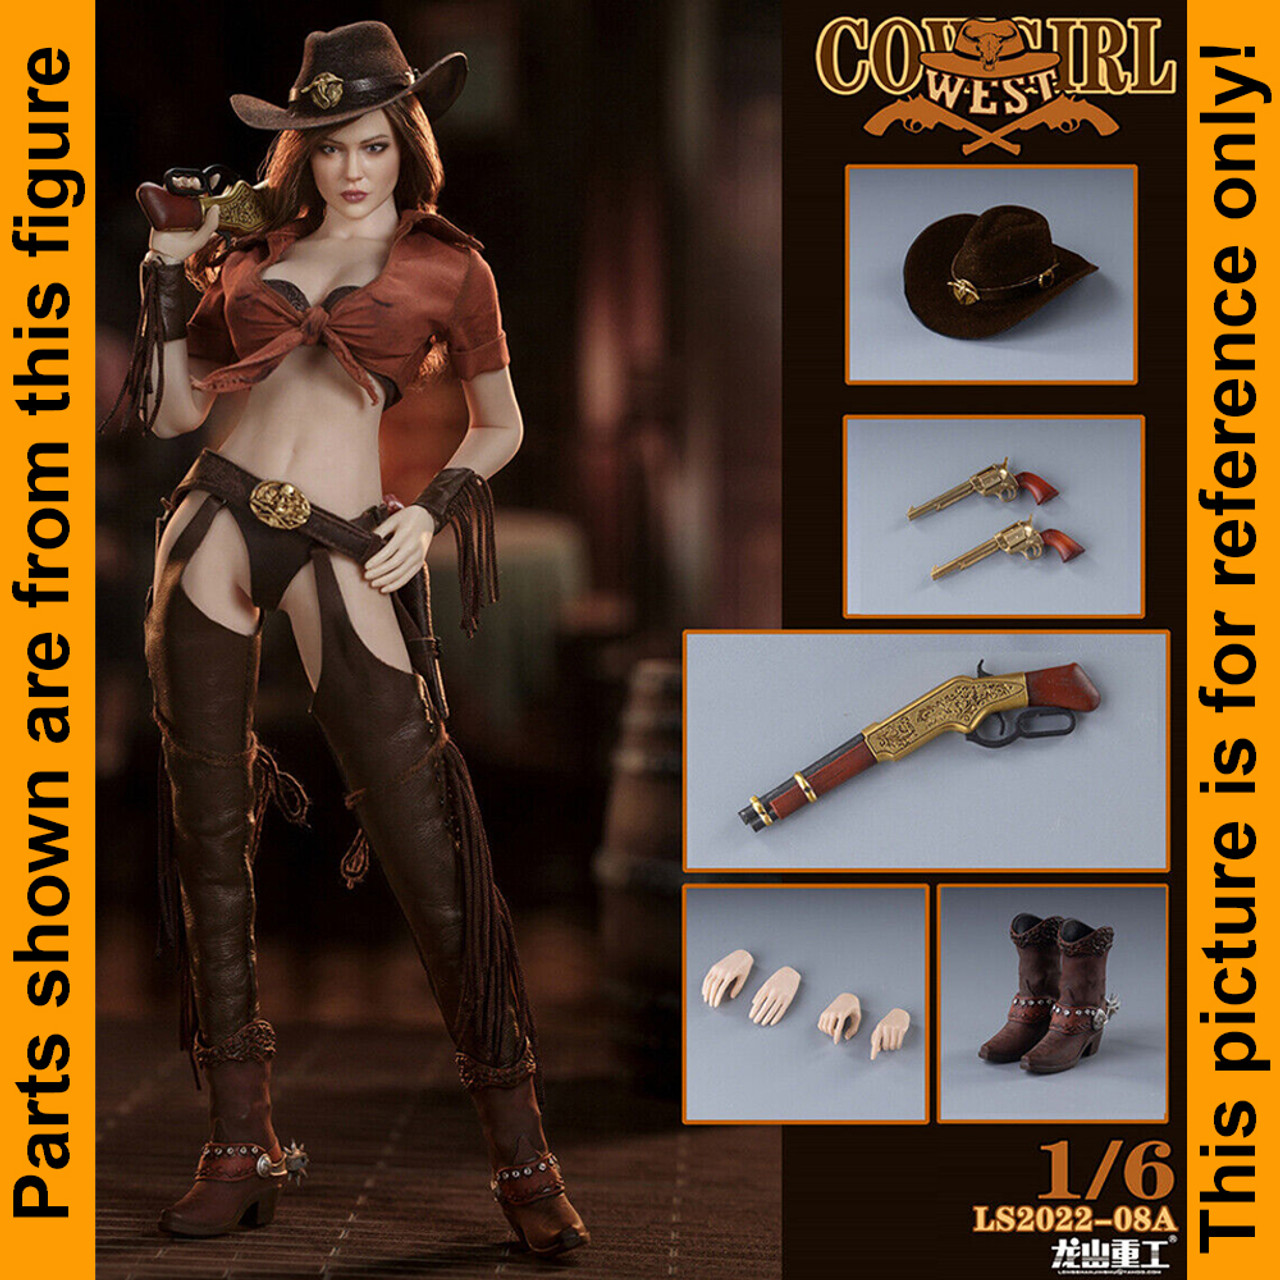 Western Cowgirl A - Head w/ Rooted Hair - 1/6 Scale -